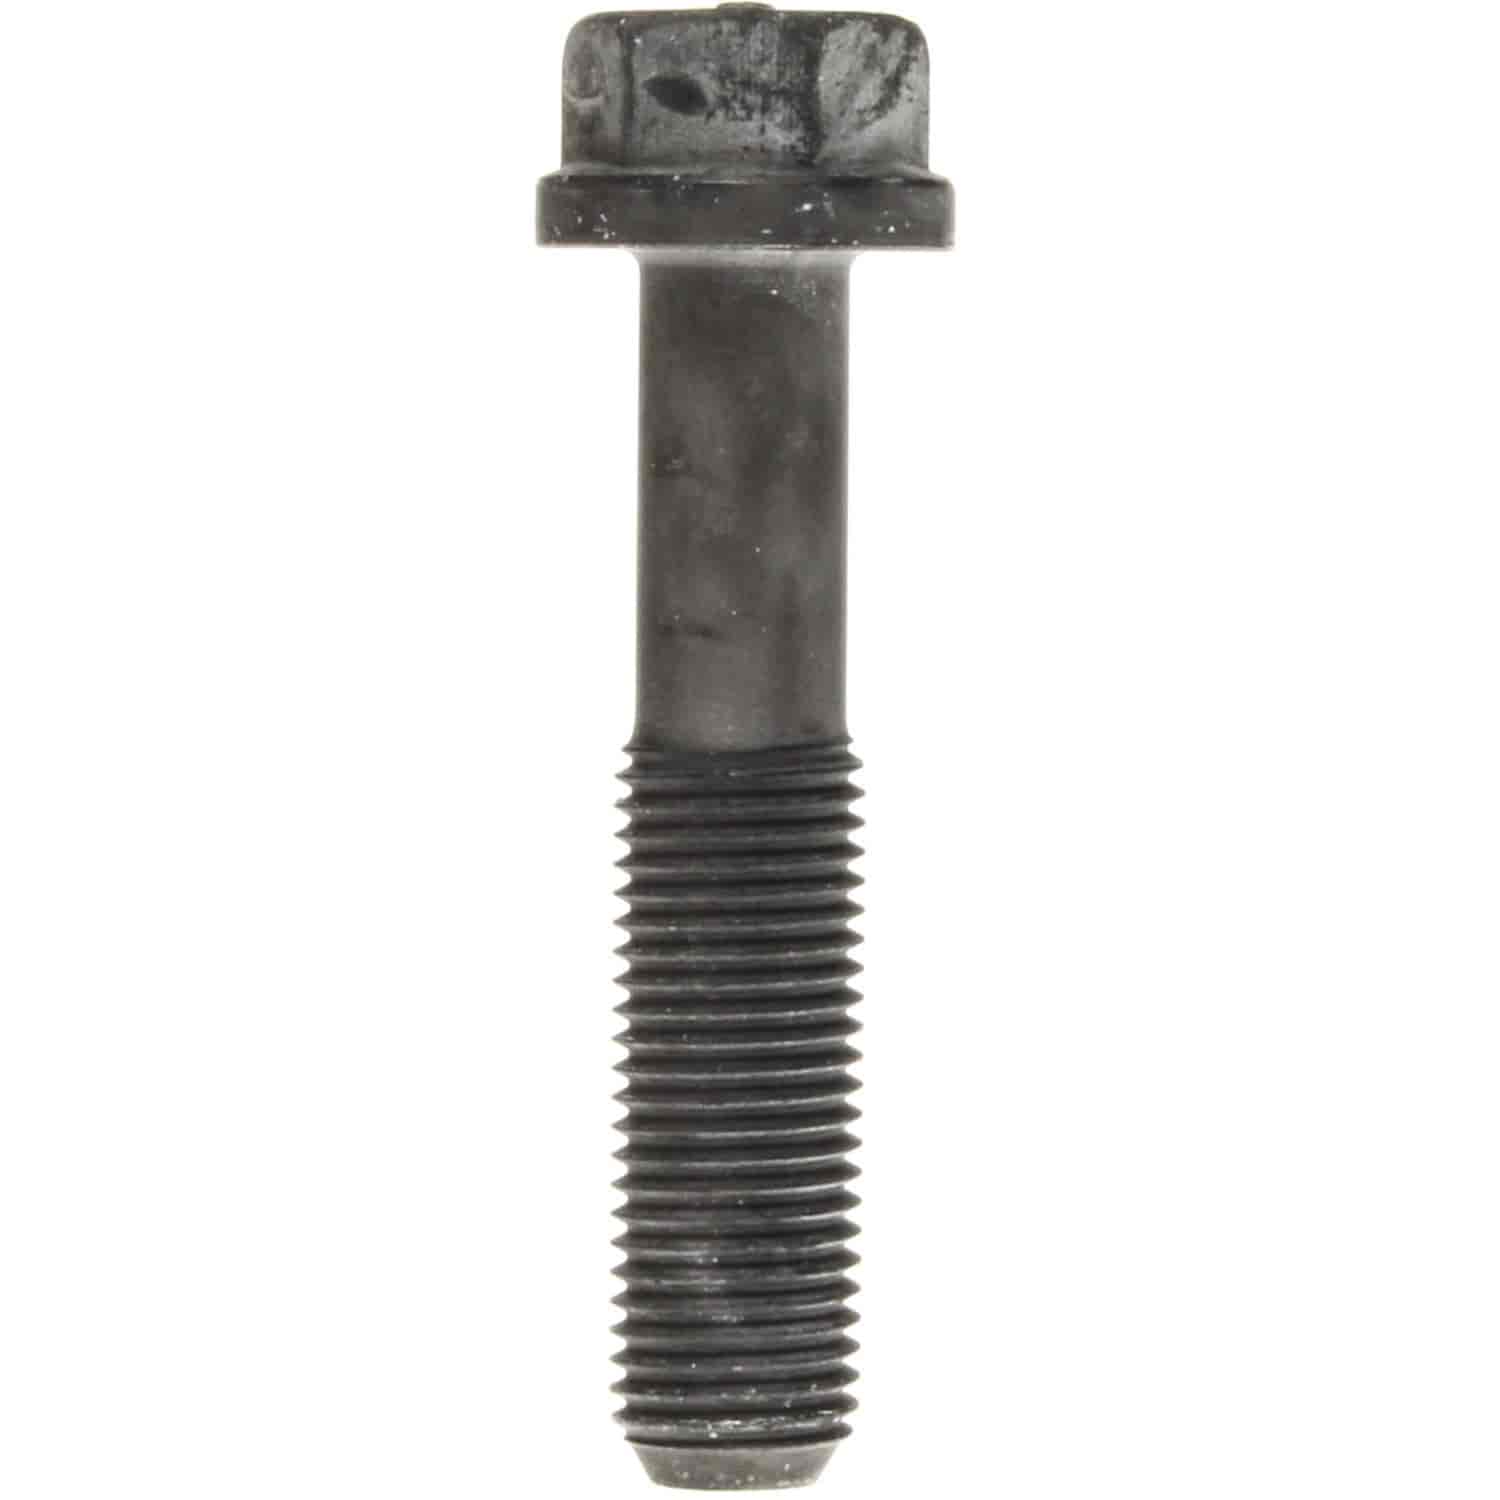 Connecting Rod Bolts John Deere 152 164 179 202 219 239 303 329 359 3029 4039 and 605